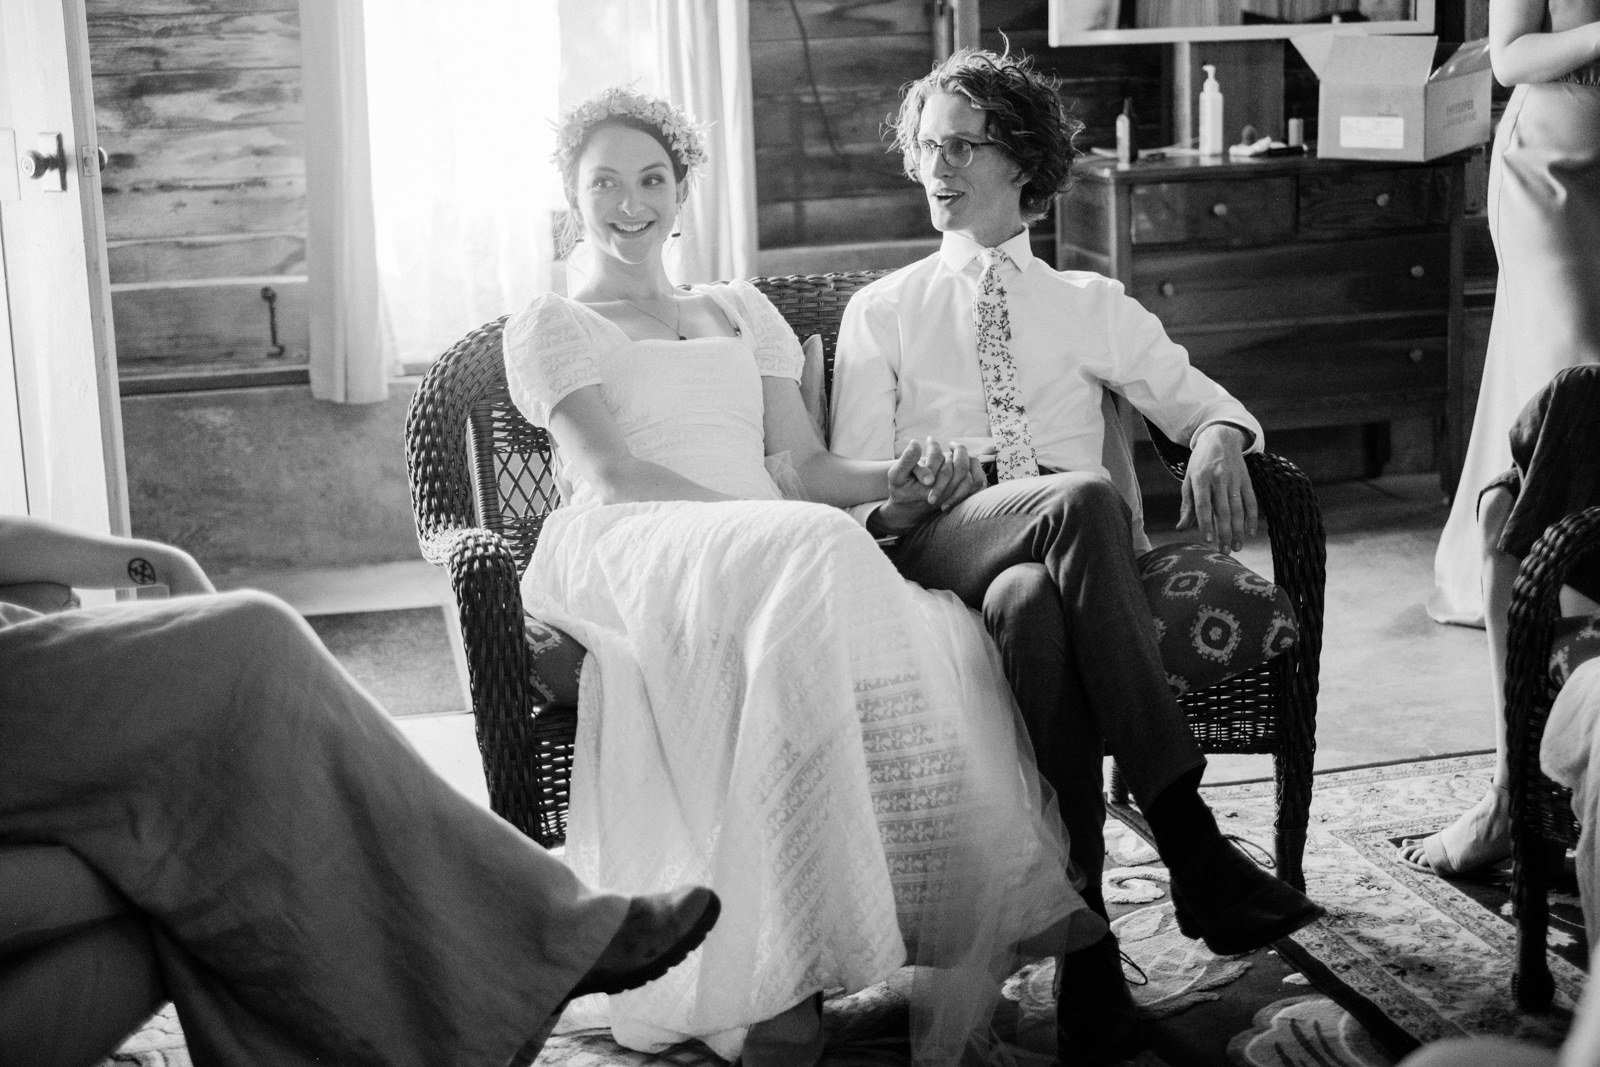  Candid moment of bride and groom sitting in wicker chair laughing with friends before wedding 